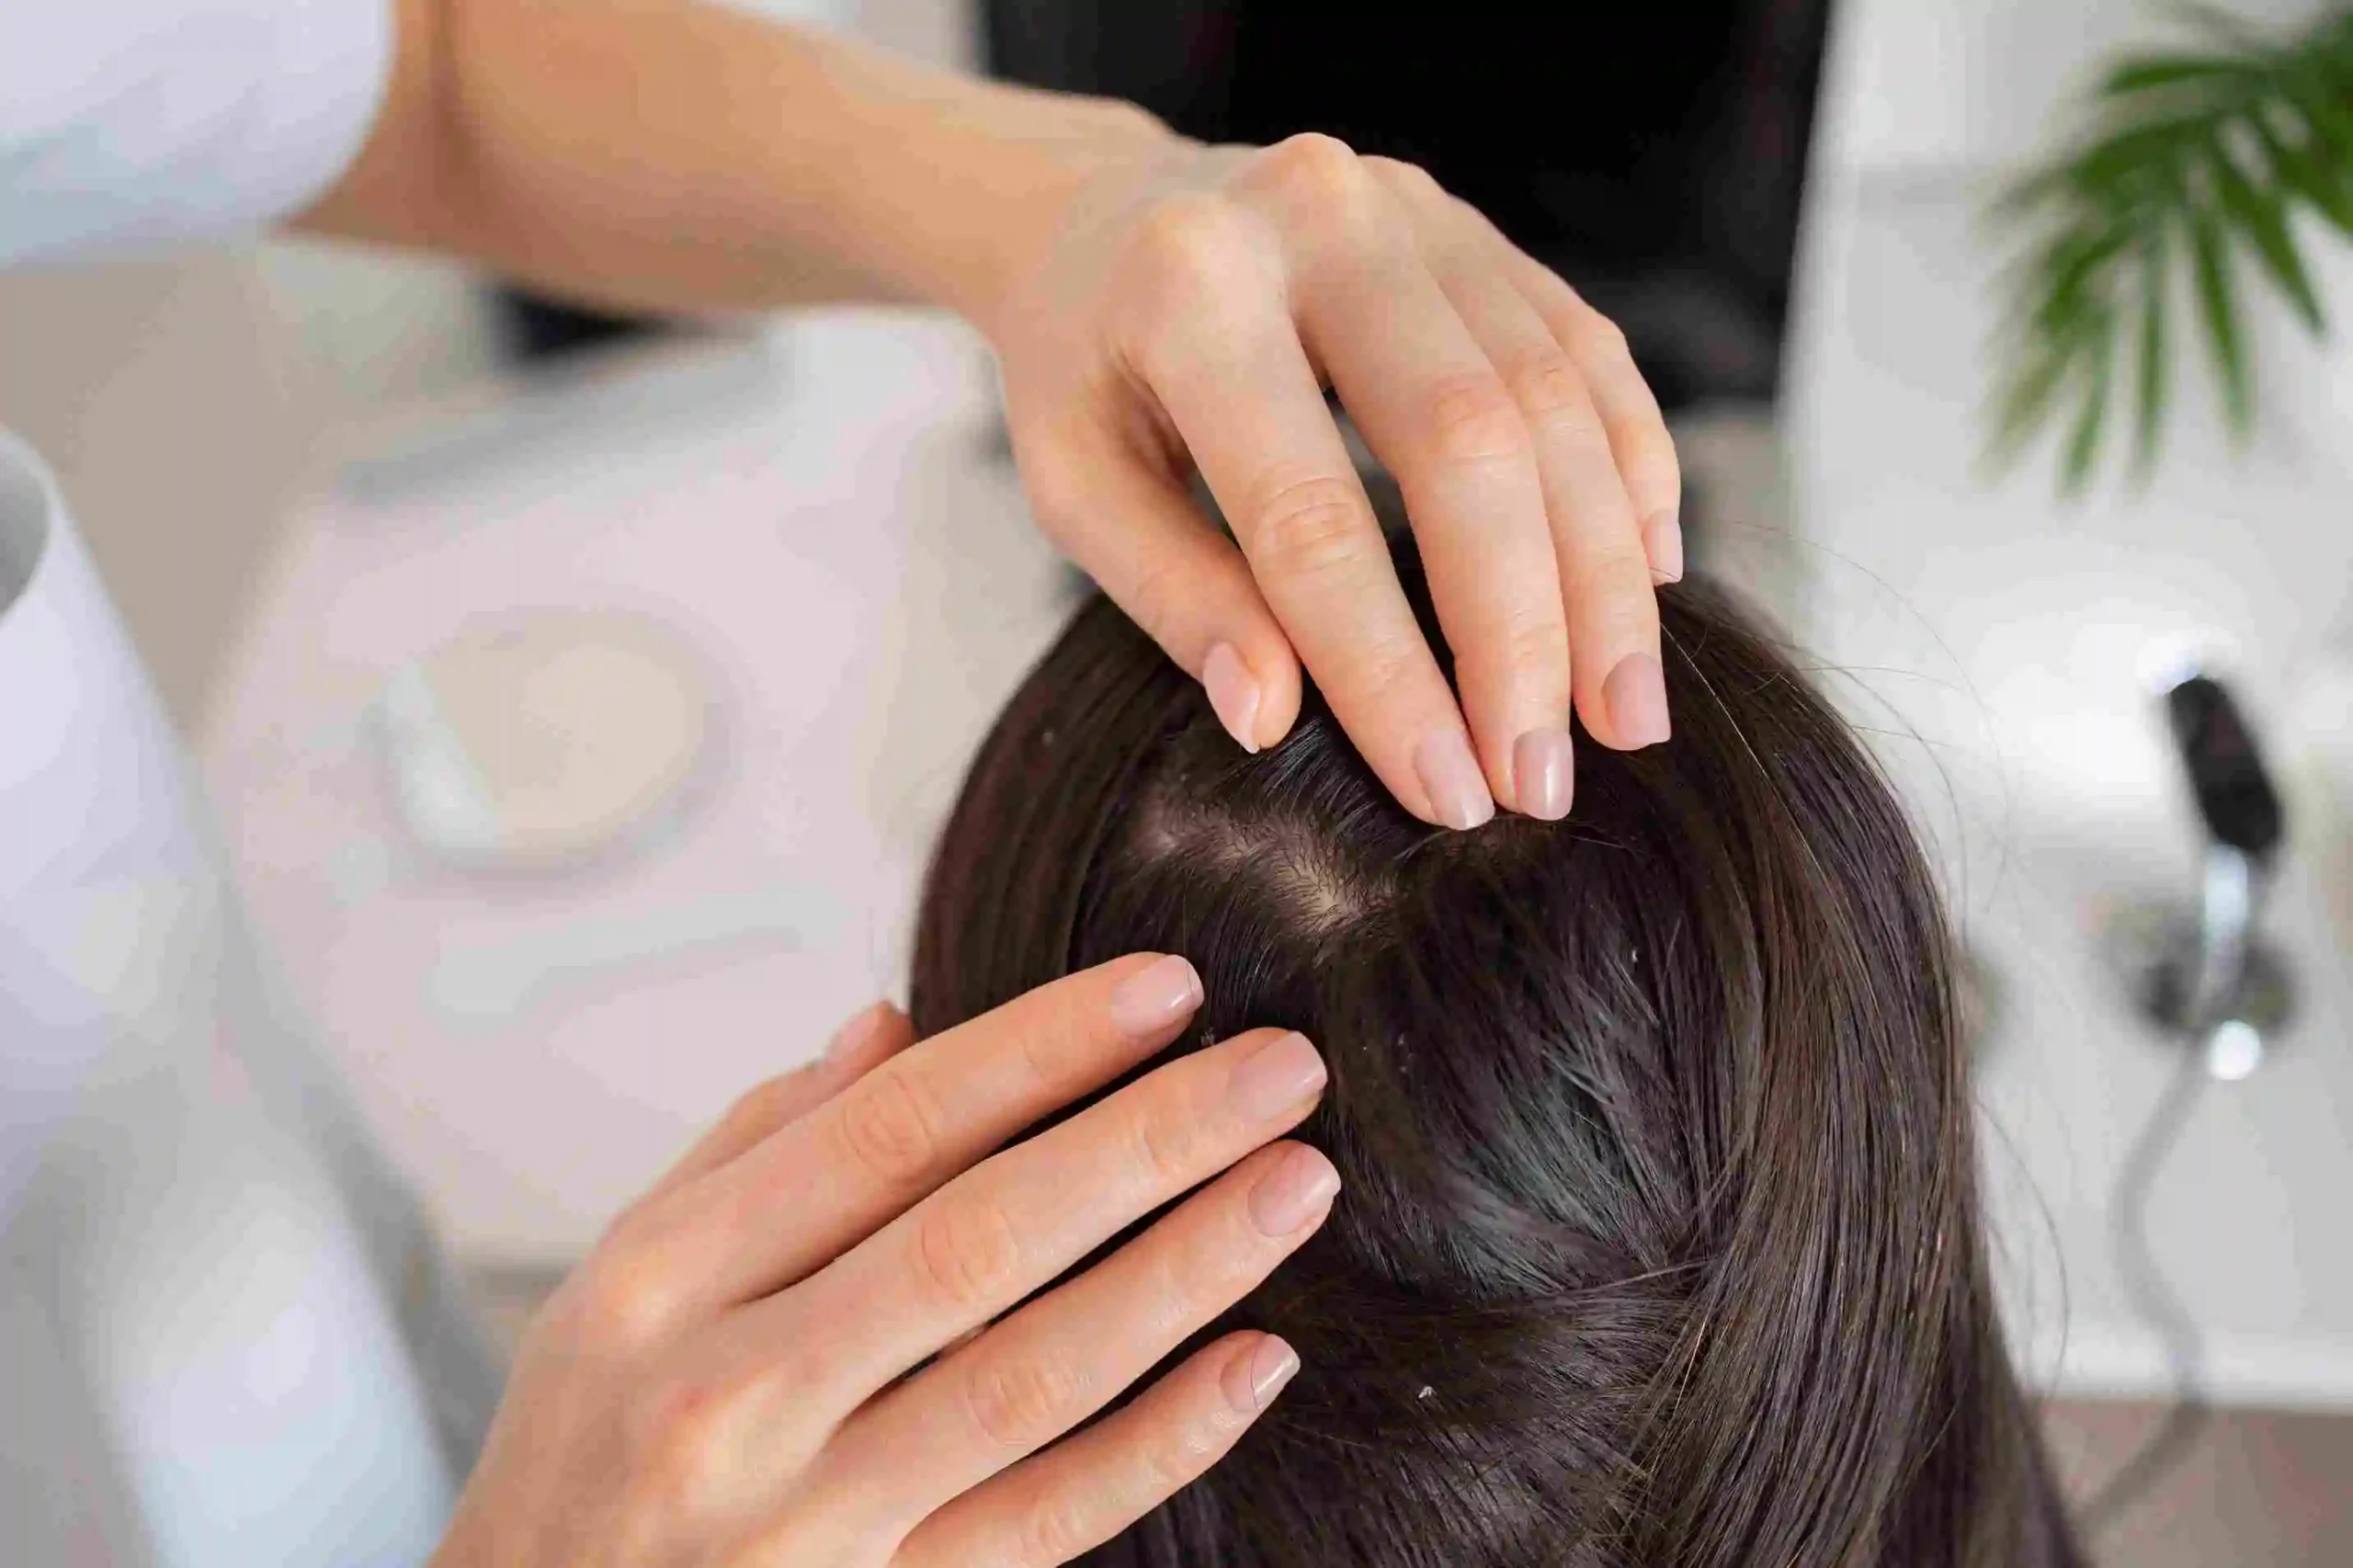 Cost of Acell injections for hair growth in Riyadh